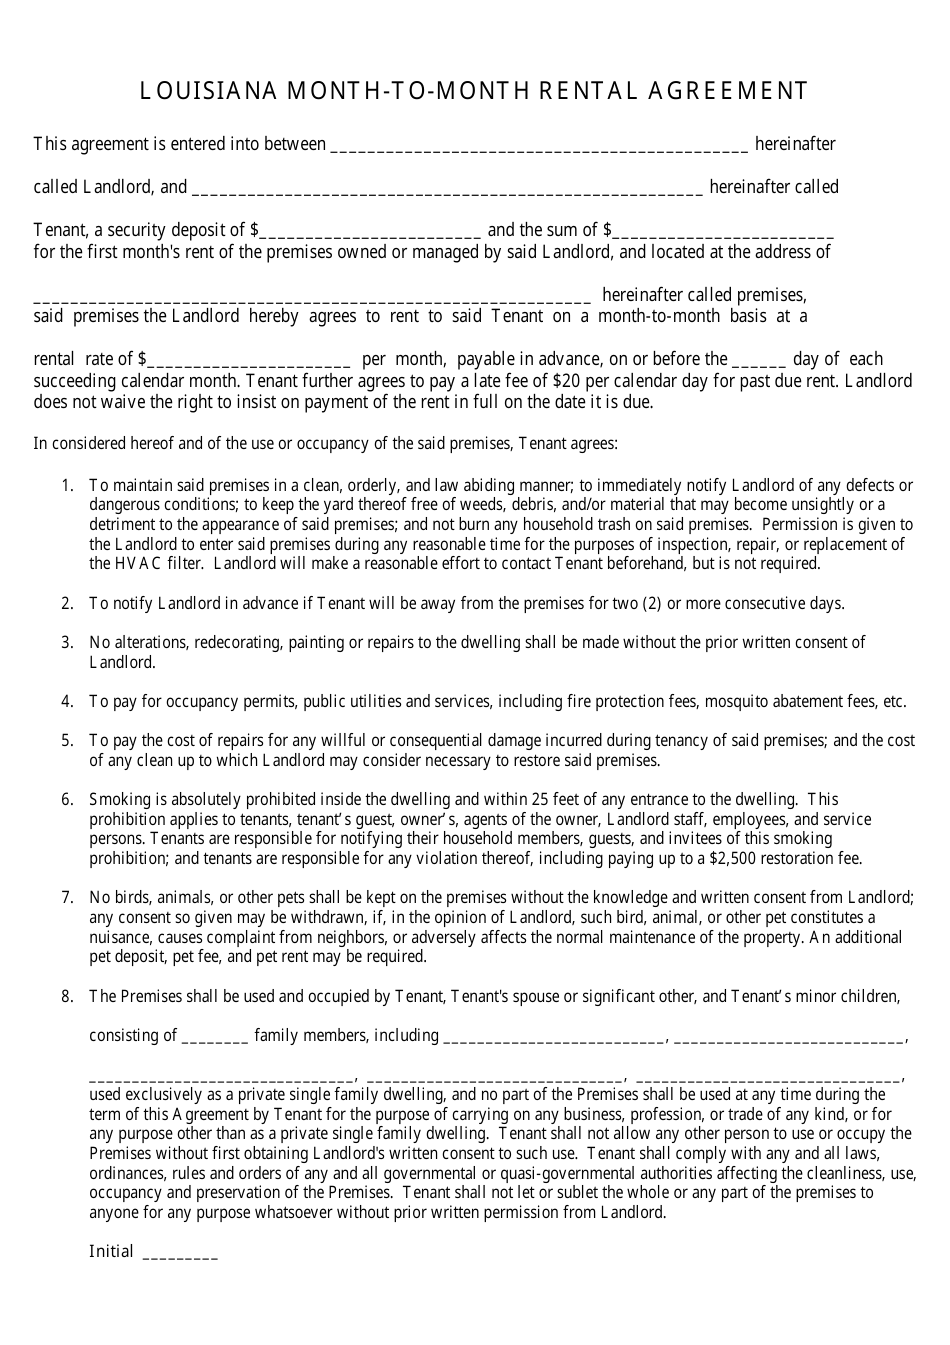 Month-To-Month Rental Agreement Template - Louisiana, Page 1